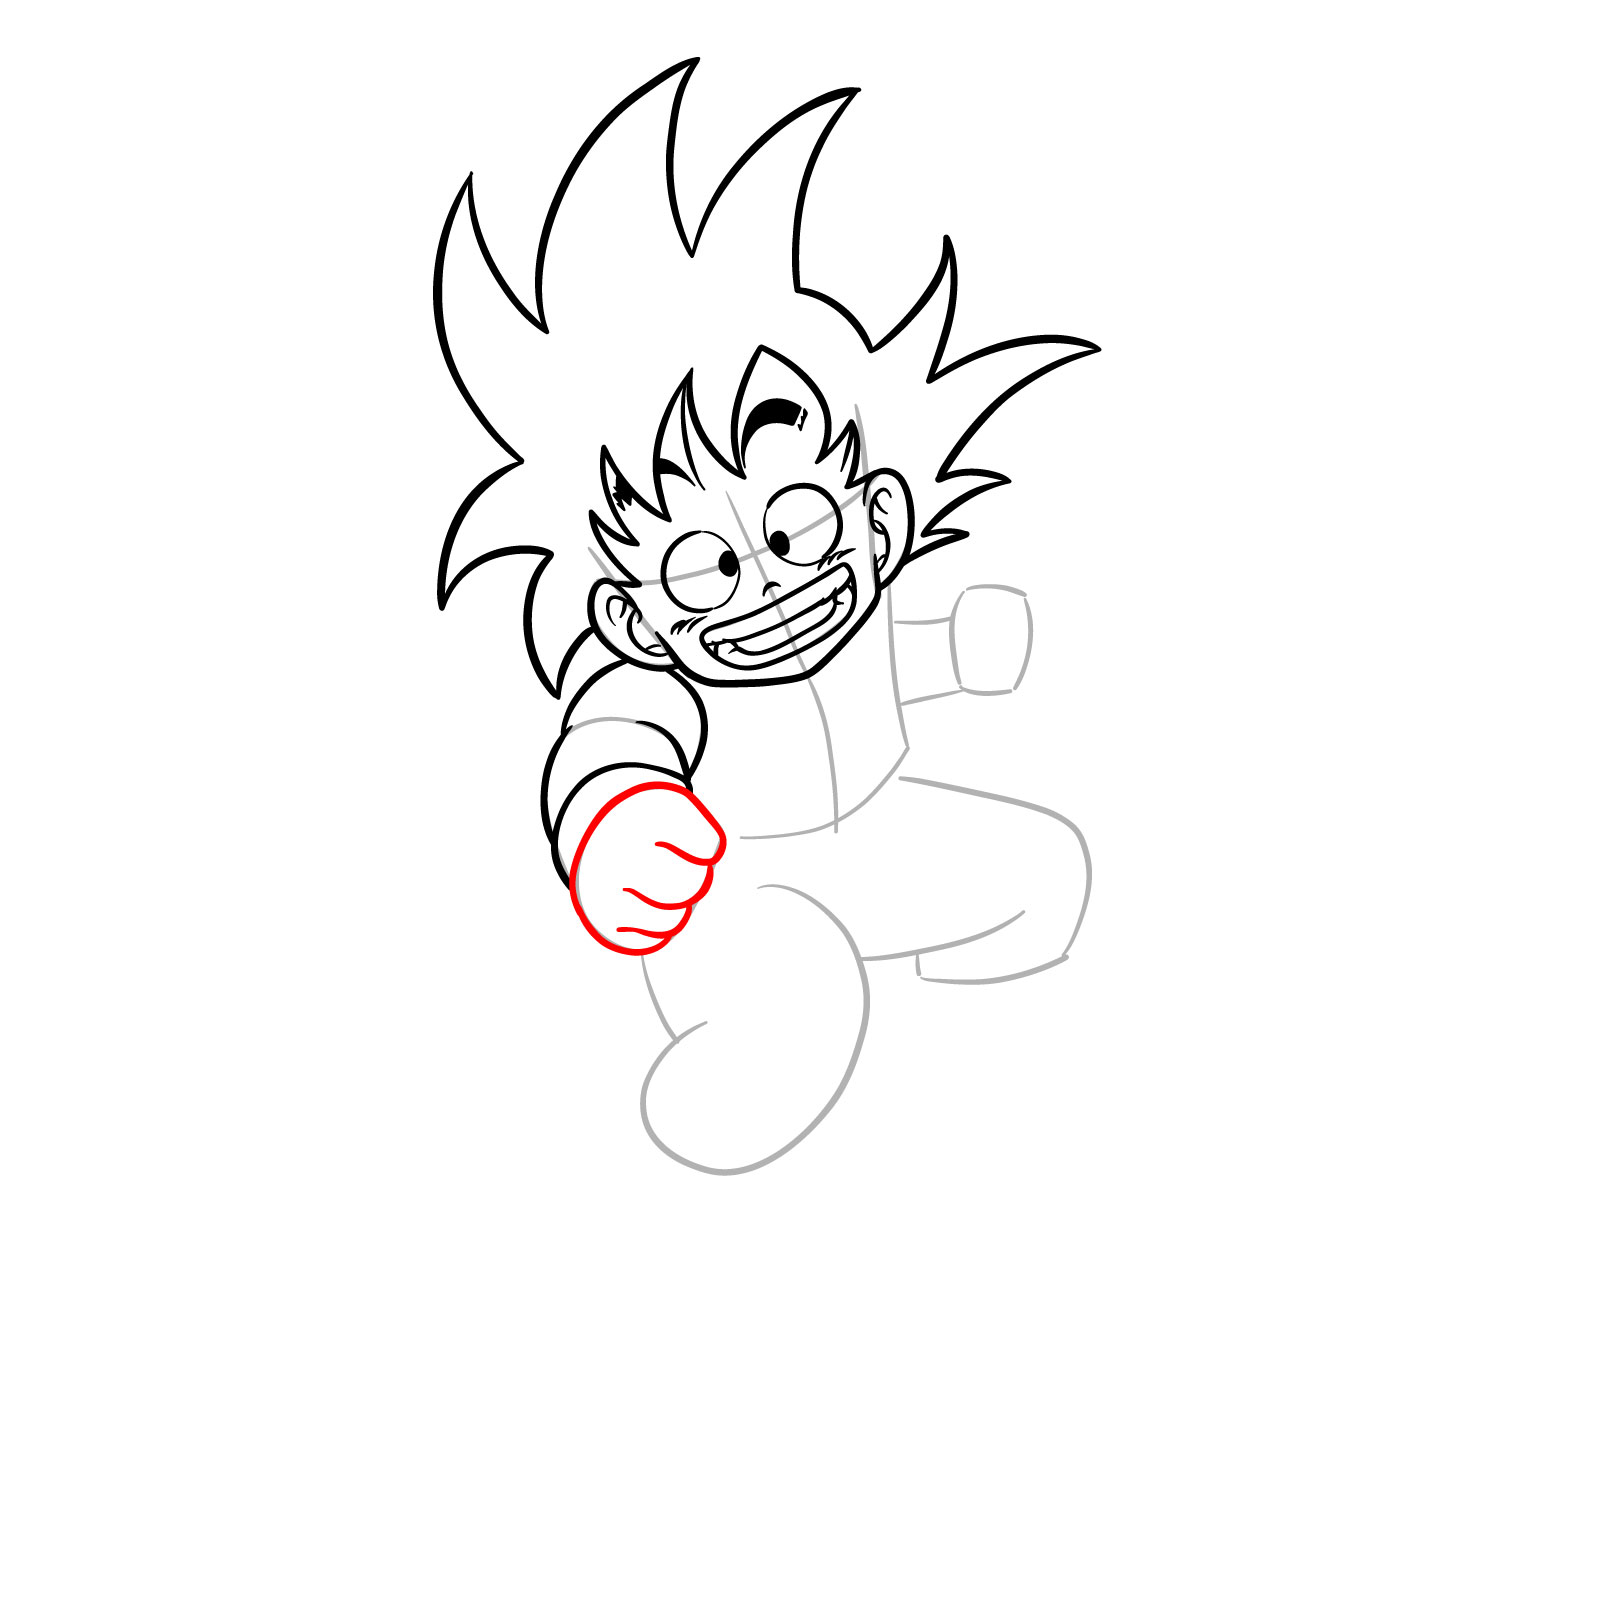 How to draw Kid Goku riding on the Flying Nimbus - step 12